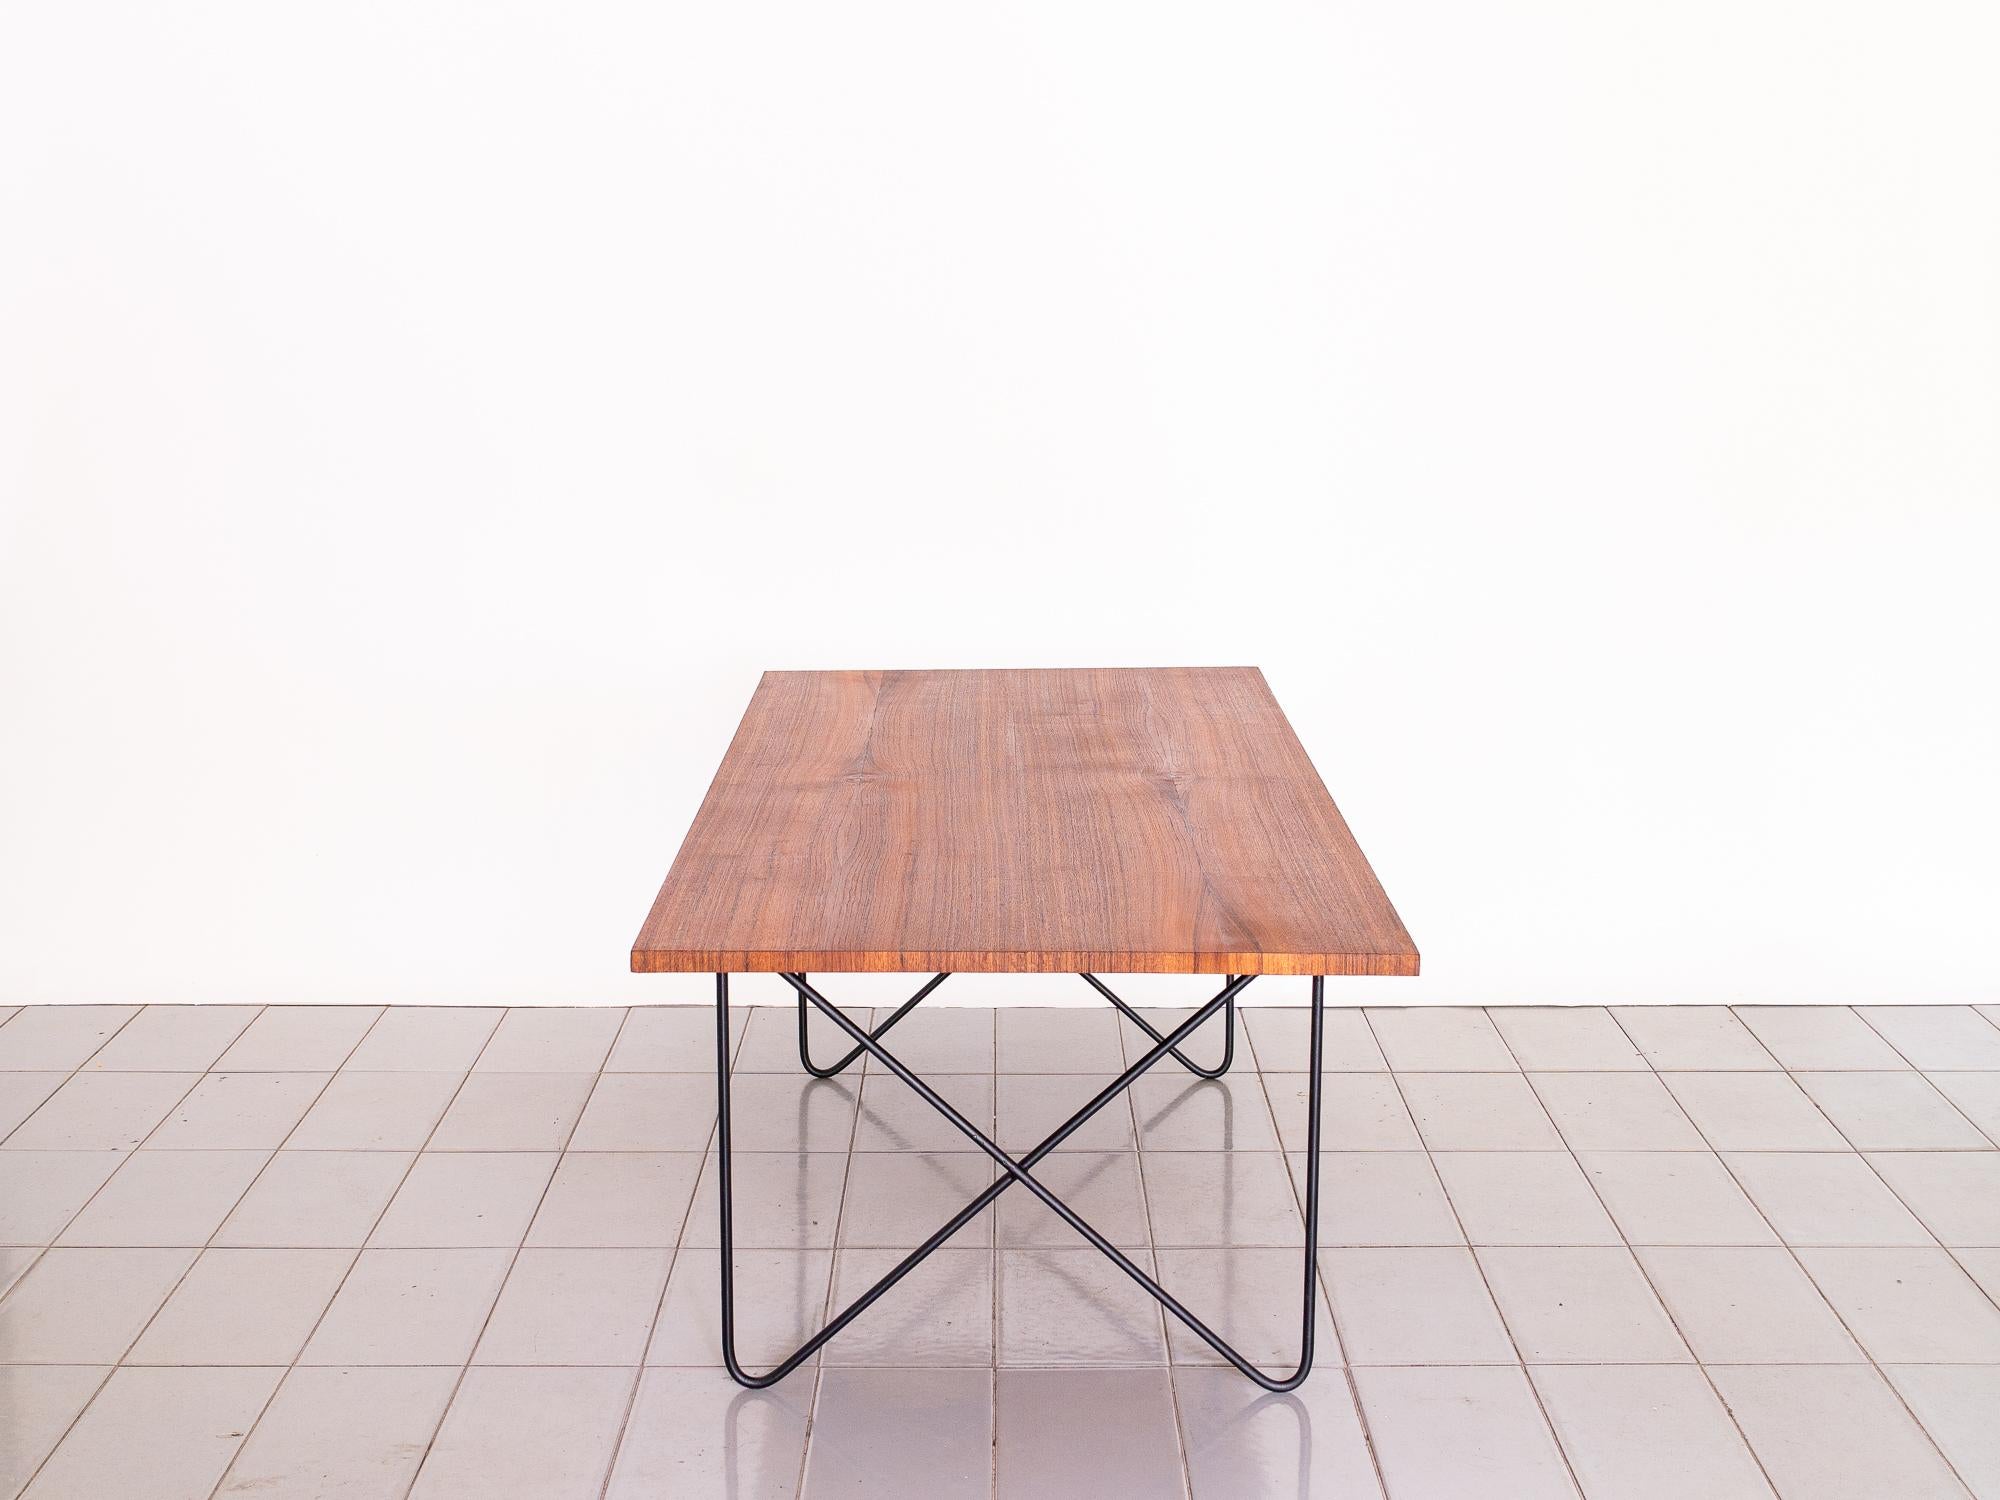 Brazilian 1950s Coffee Table in Wrought Iron and Teak Attributed to Ernesto Hauner, Brazil